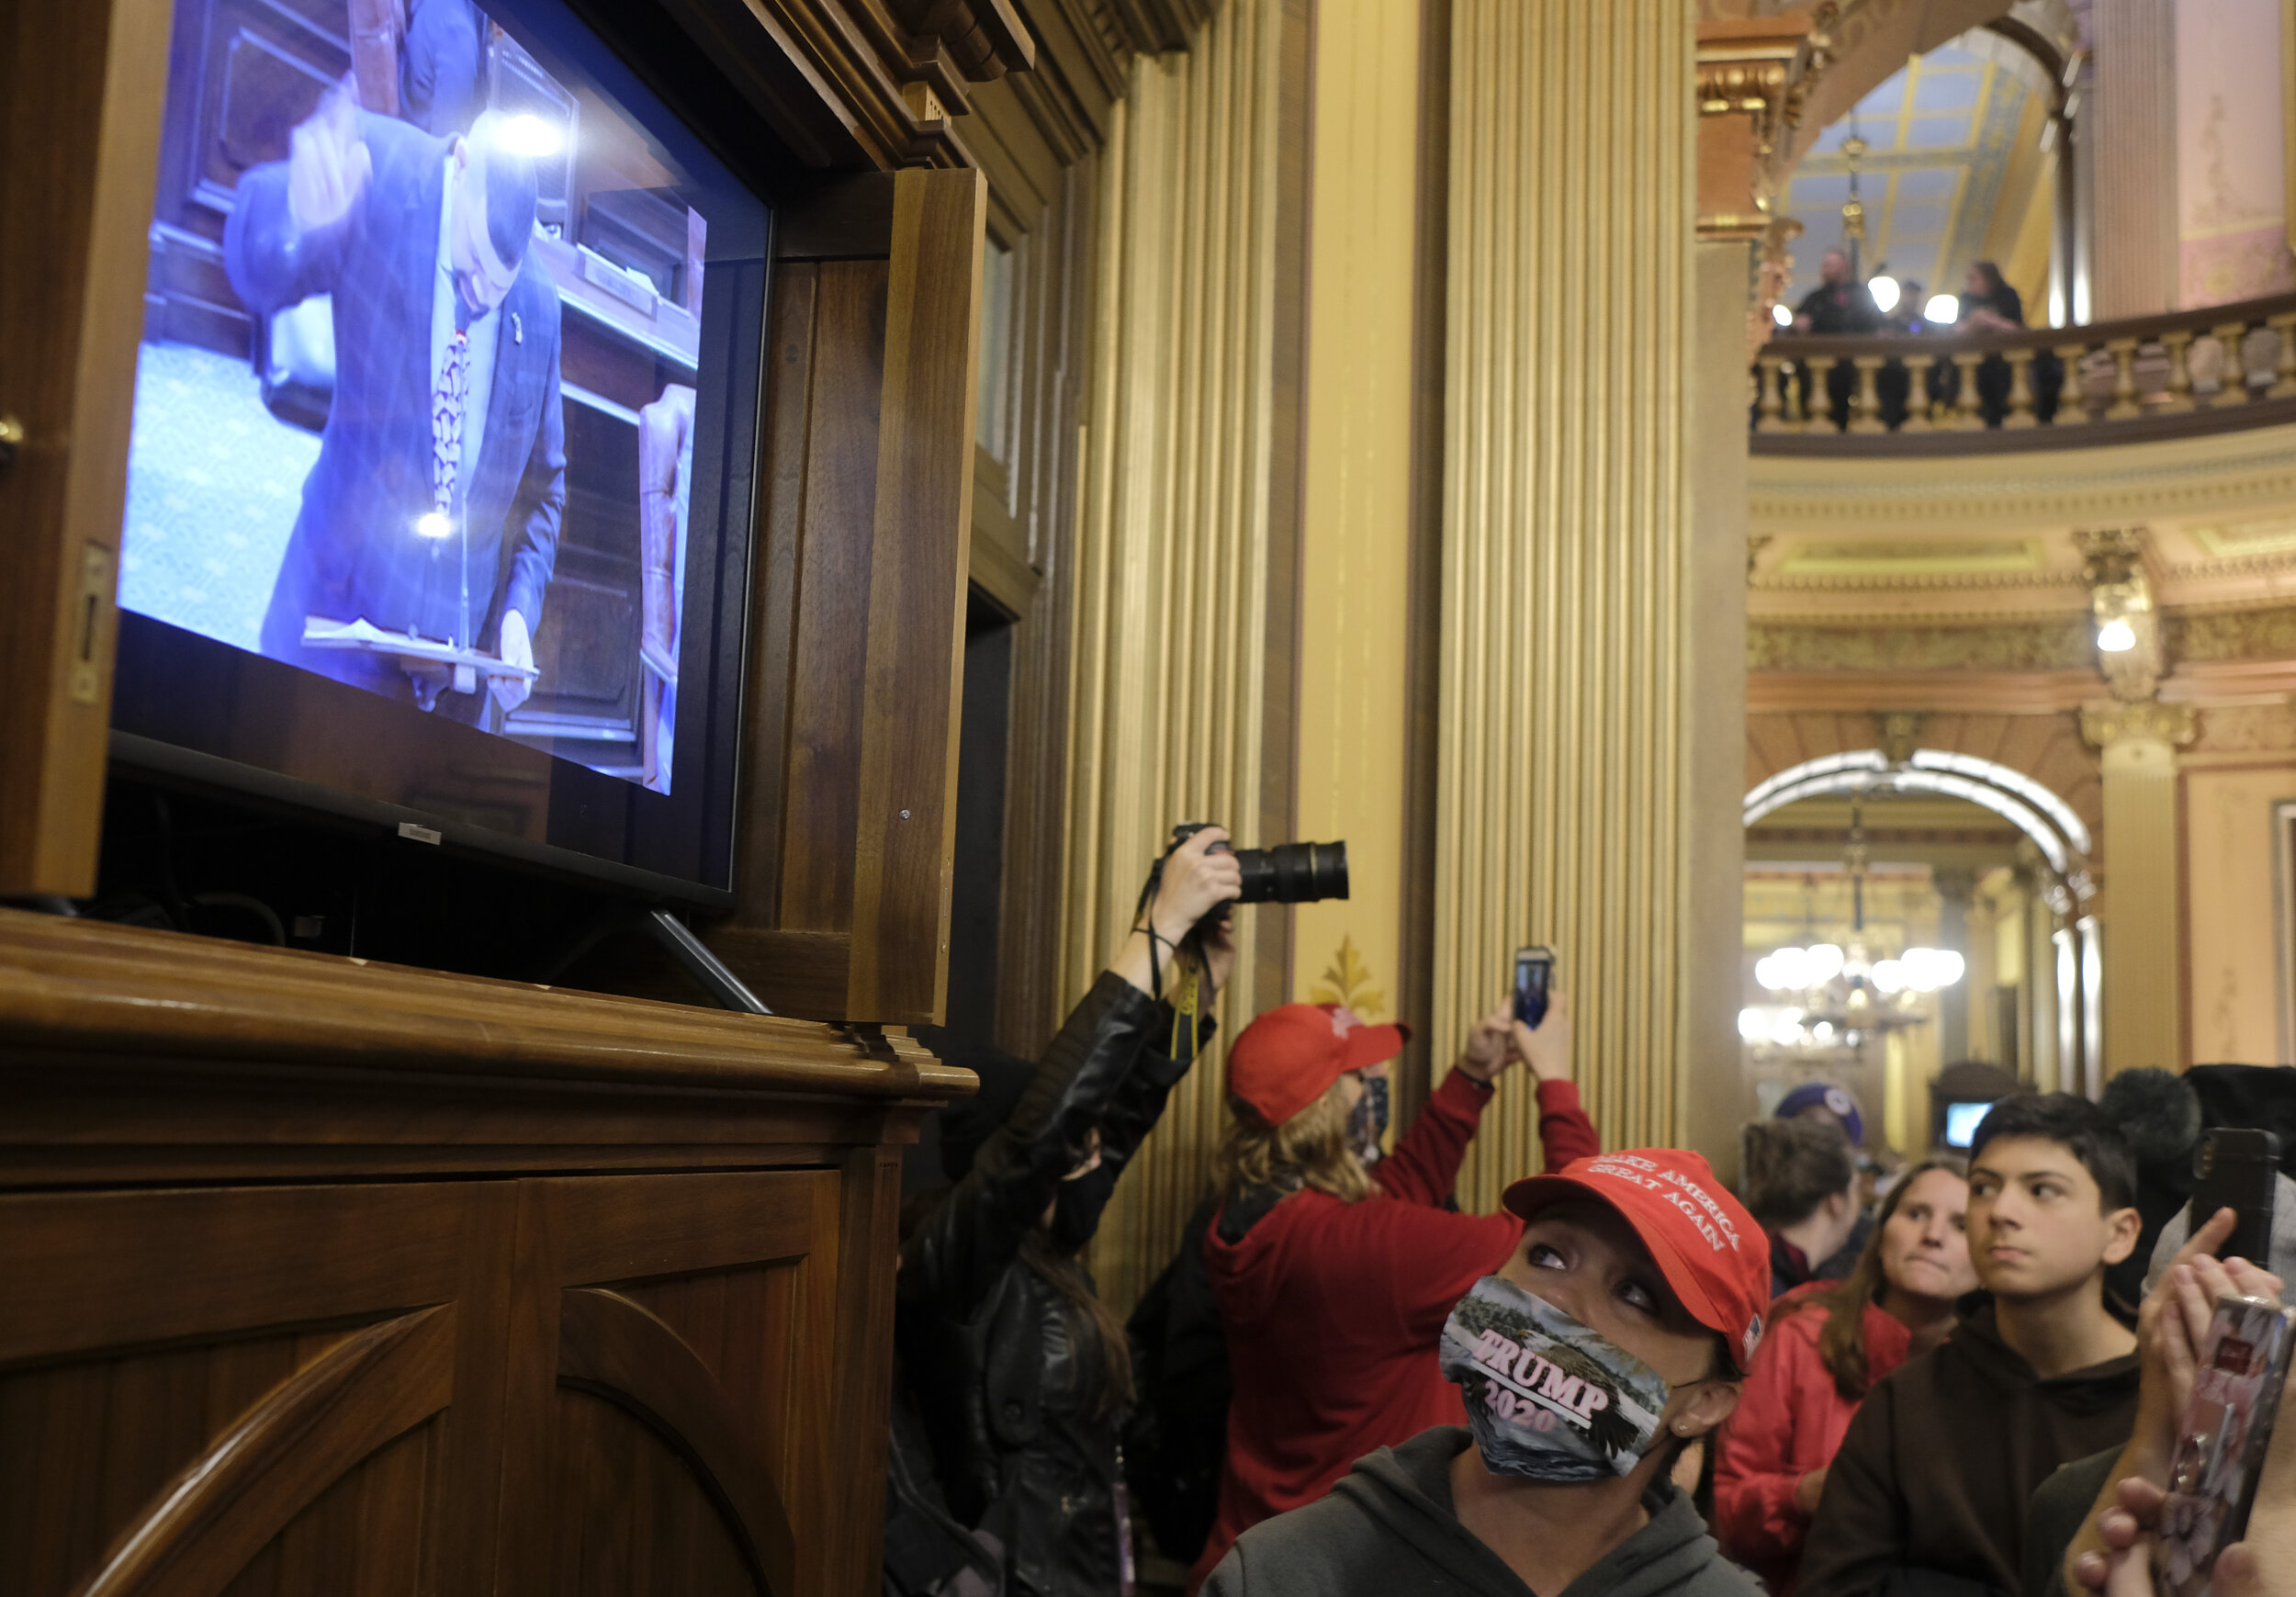  An anti-lockdown protester watches the senate meeting underway on a television in the Michigan Capitol Building during a large anti-lockdown protest during which armed protesters and militia members occupied the area just outside the Senate chamber 